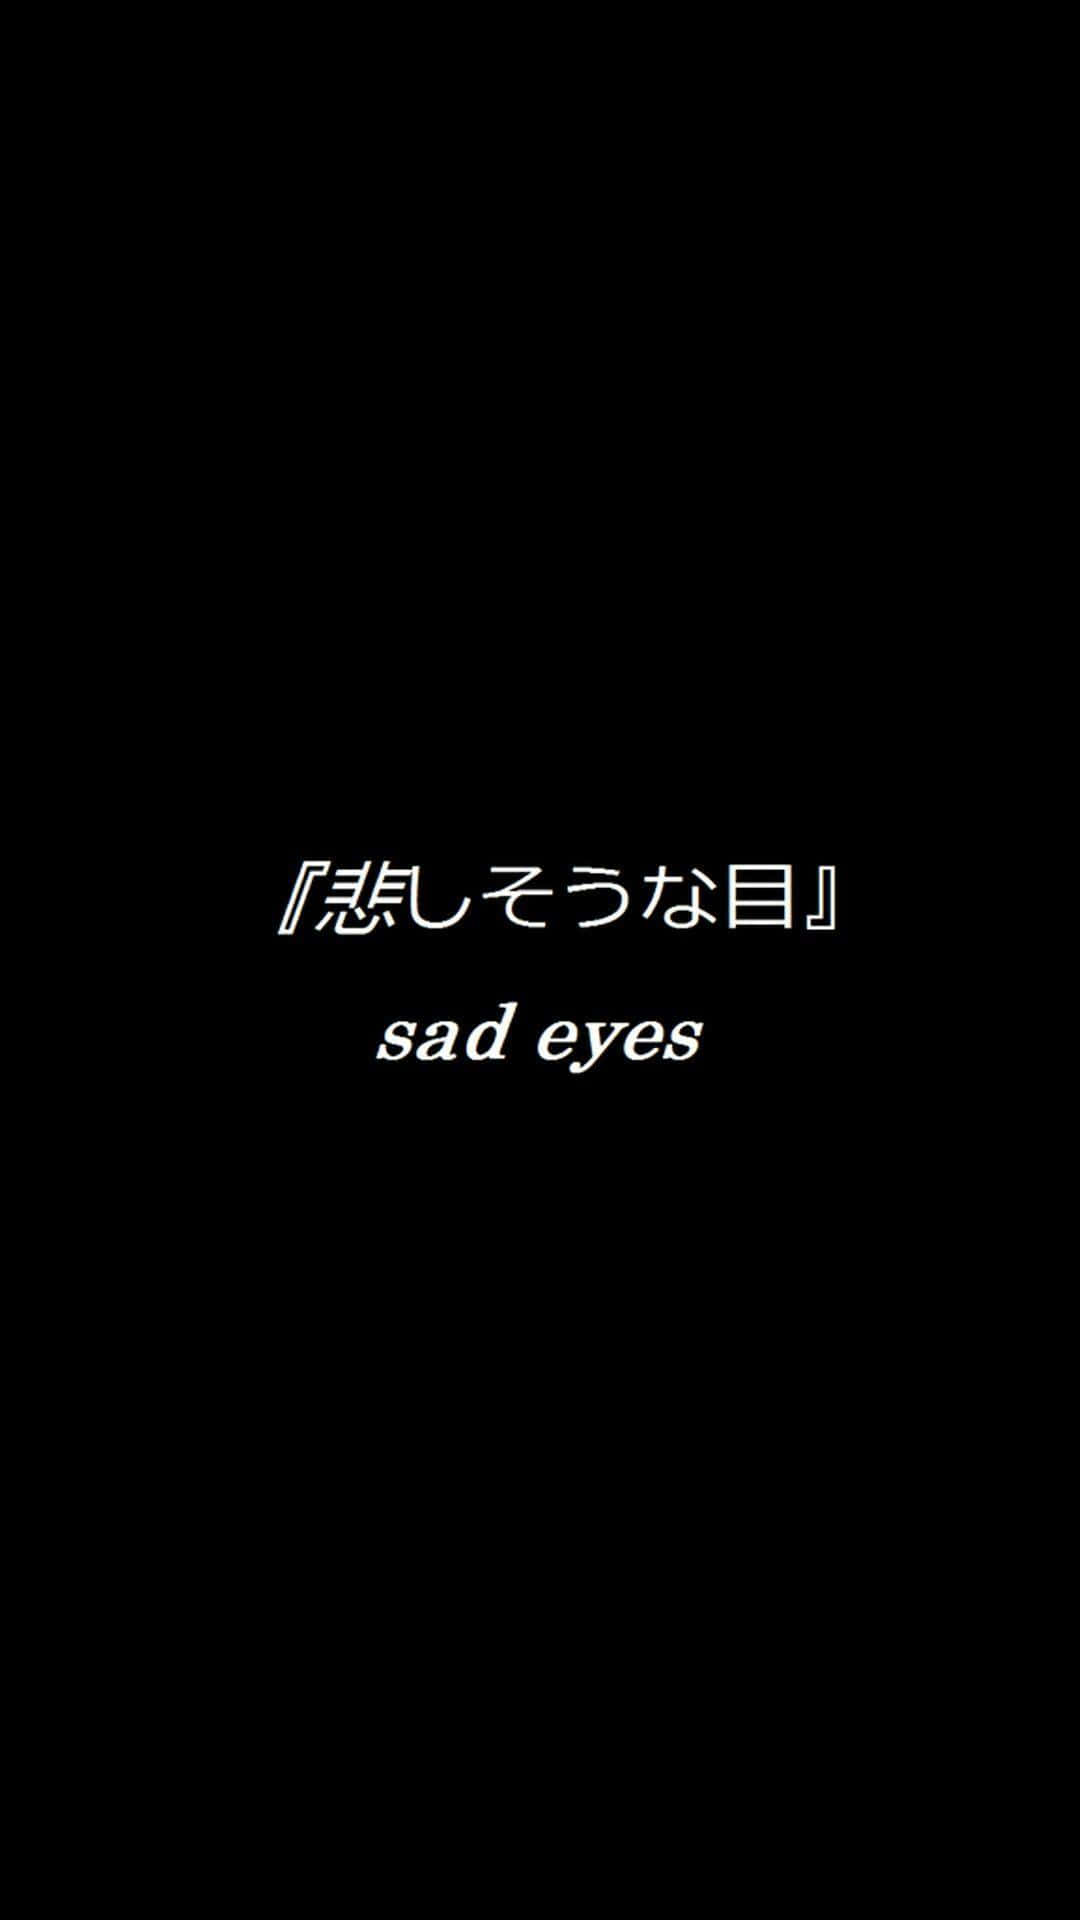 A Black Background With The Words Sad Eyes